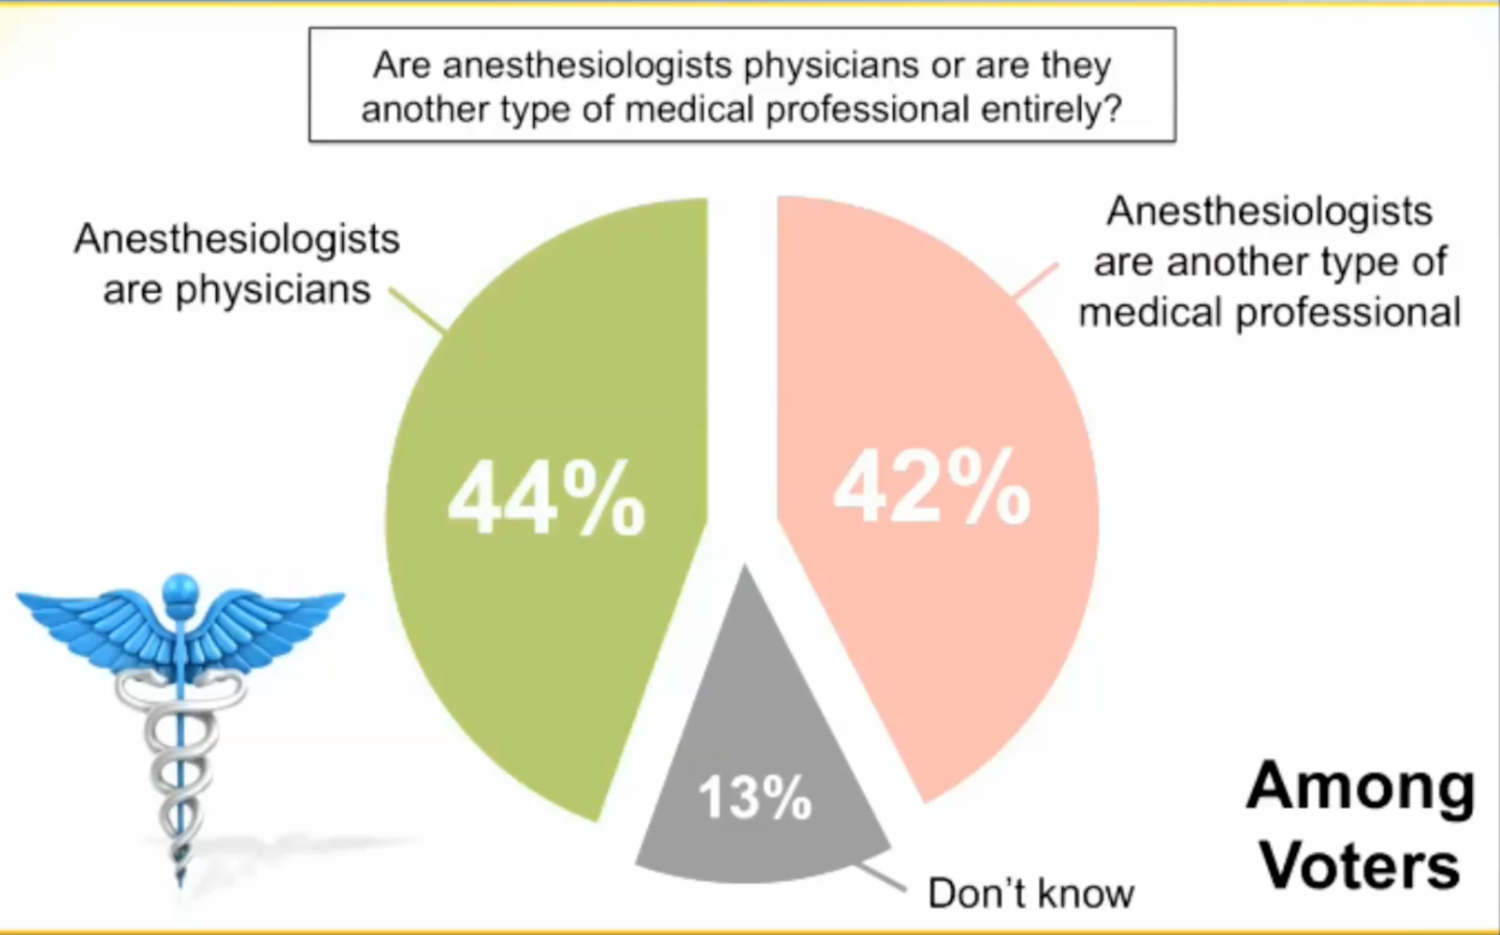 Research demonstrating public does not equate anesthesiologist with physician